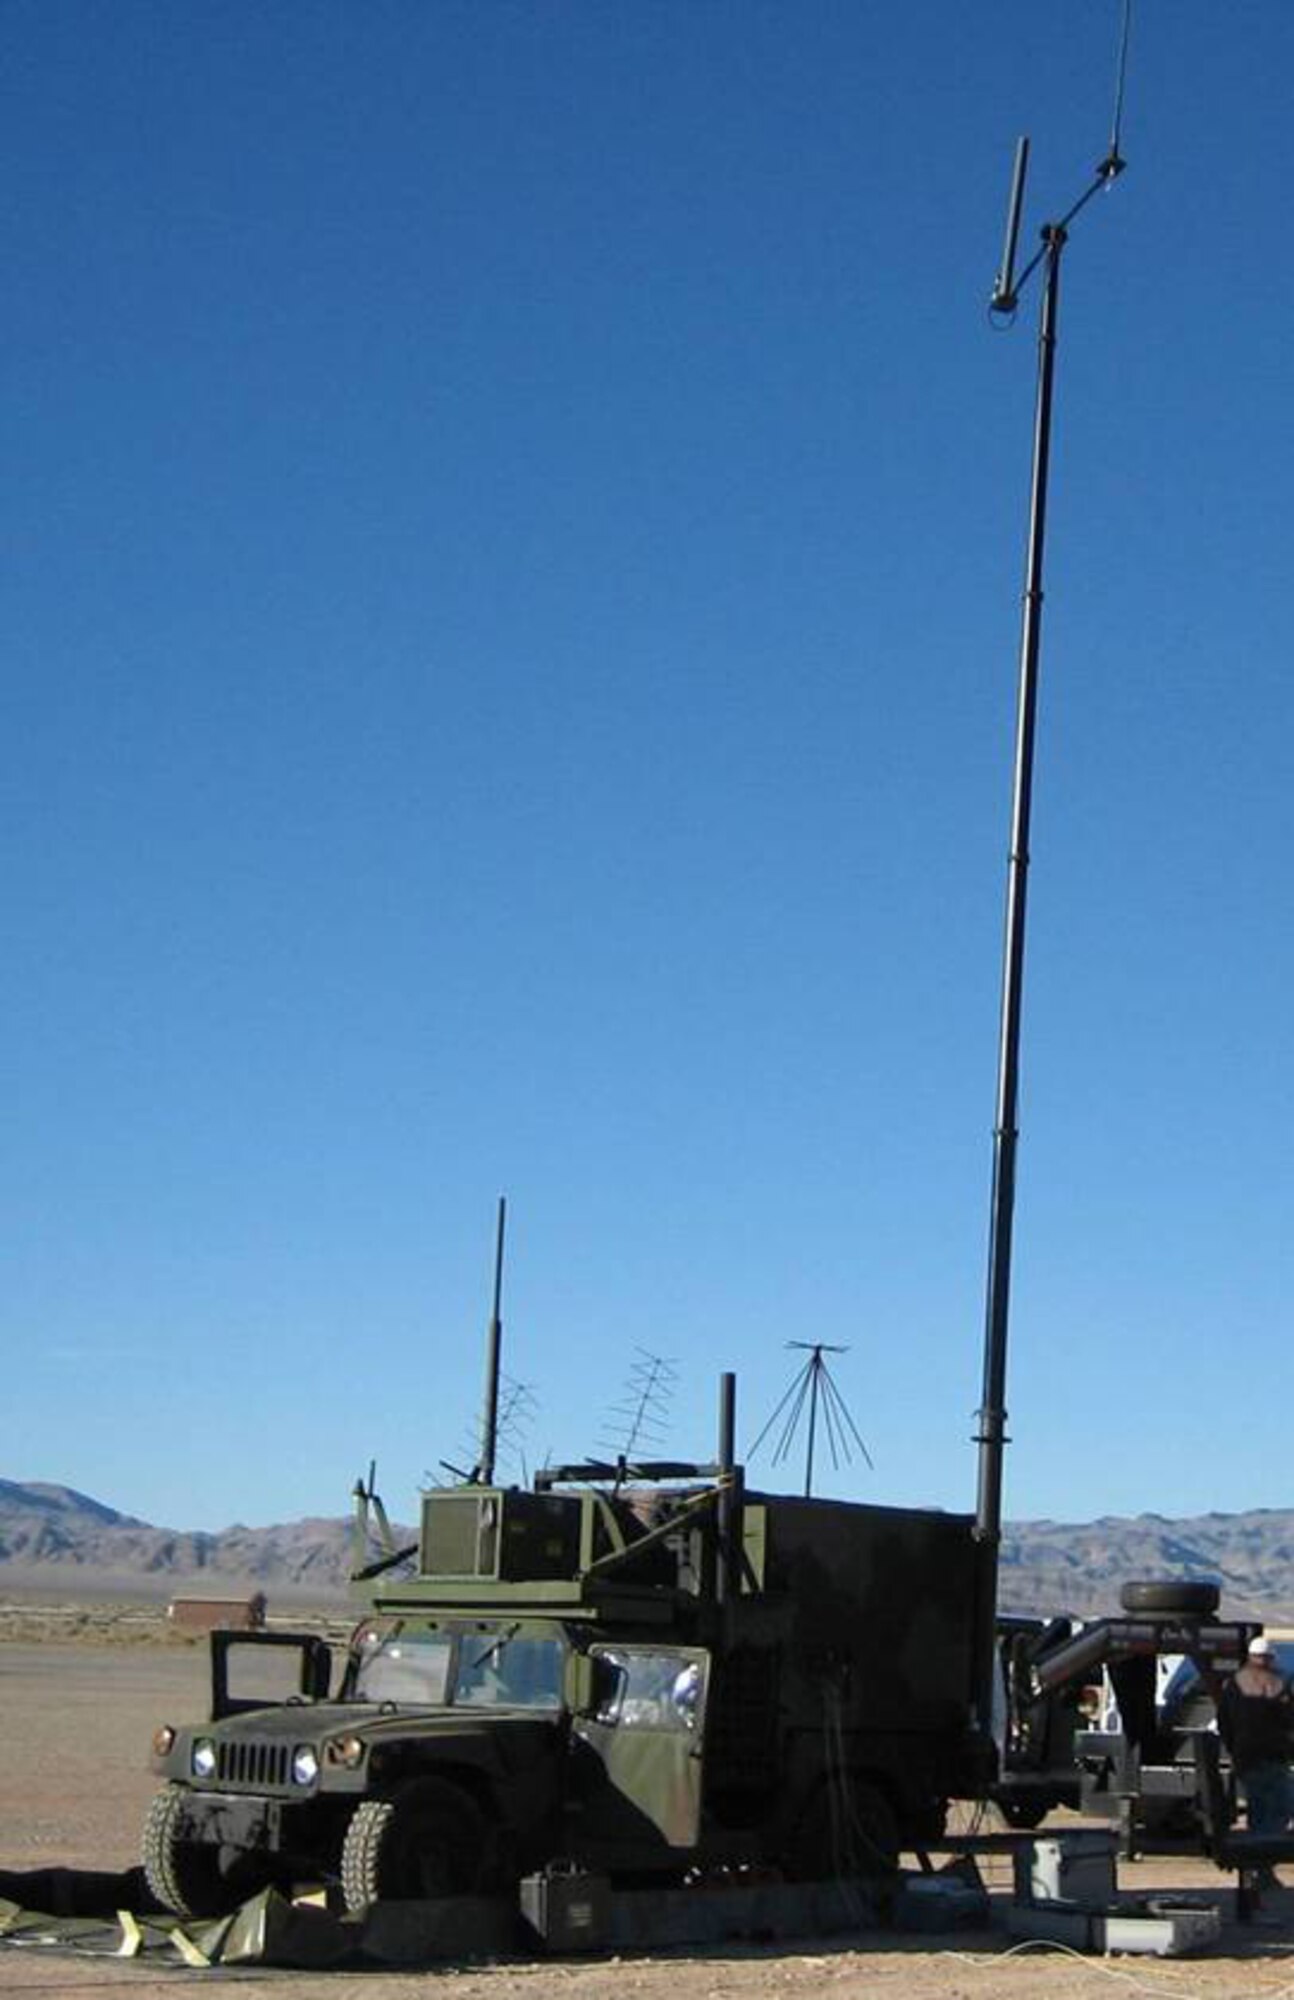 The Ground Mobile Gateway contains tactical battlefield command and control functions.  It is an upgrade to the existing Air Support Operations Center and will provide a real-time common operating picture of the battlefield, air and ground assets, to the ASOC and to the Joint Terminal Attack Controllers.